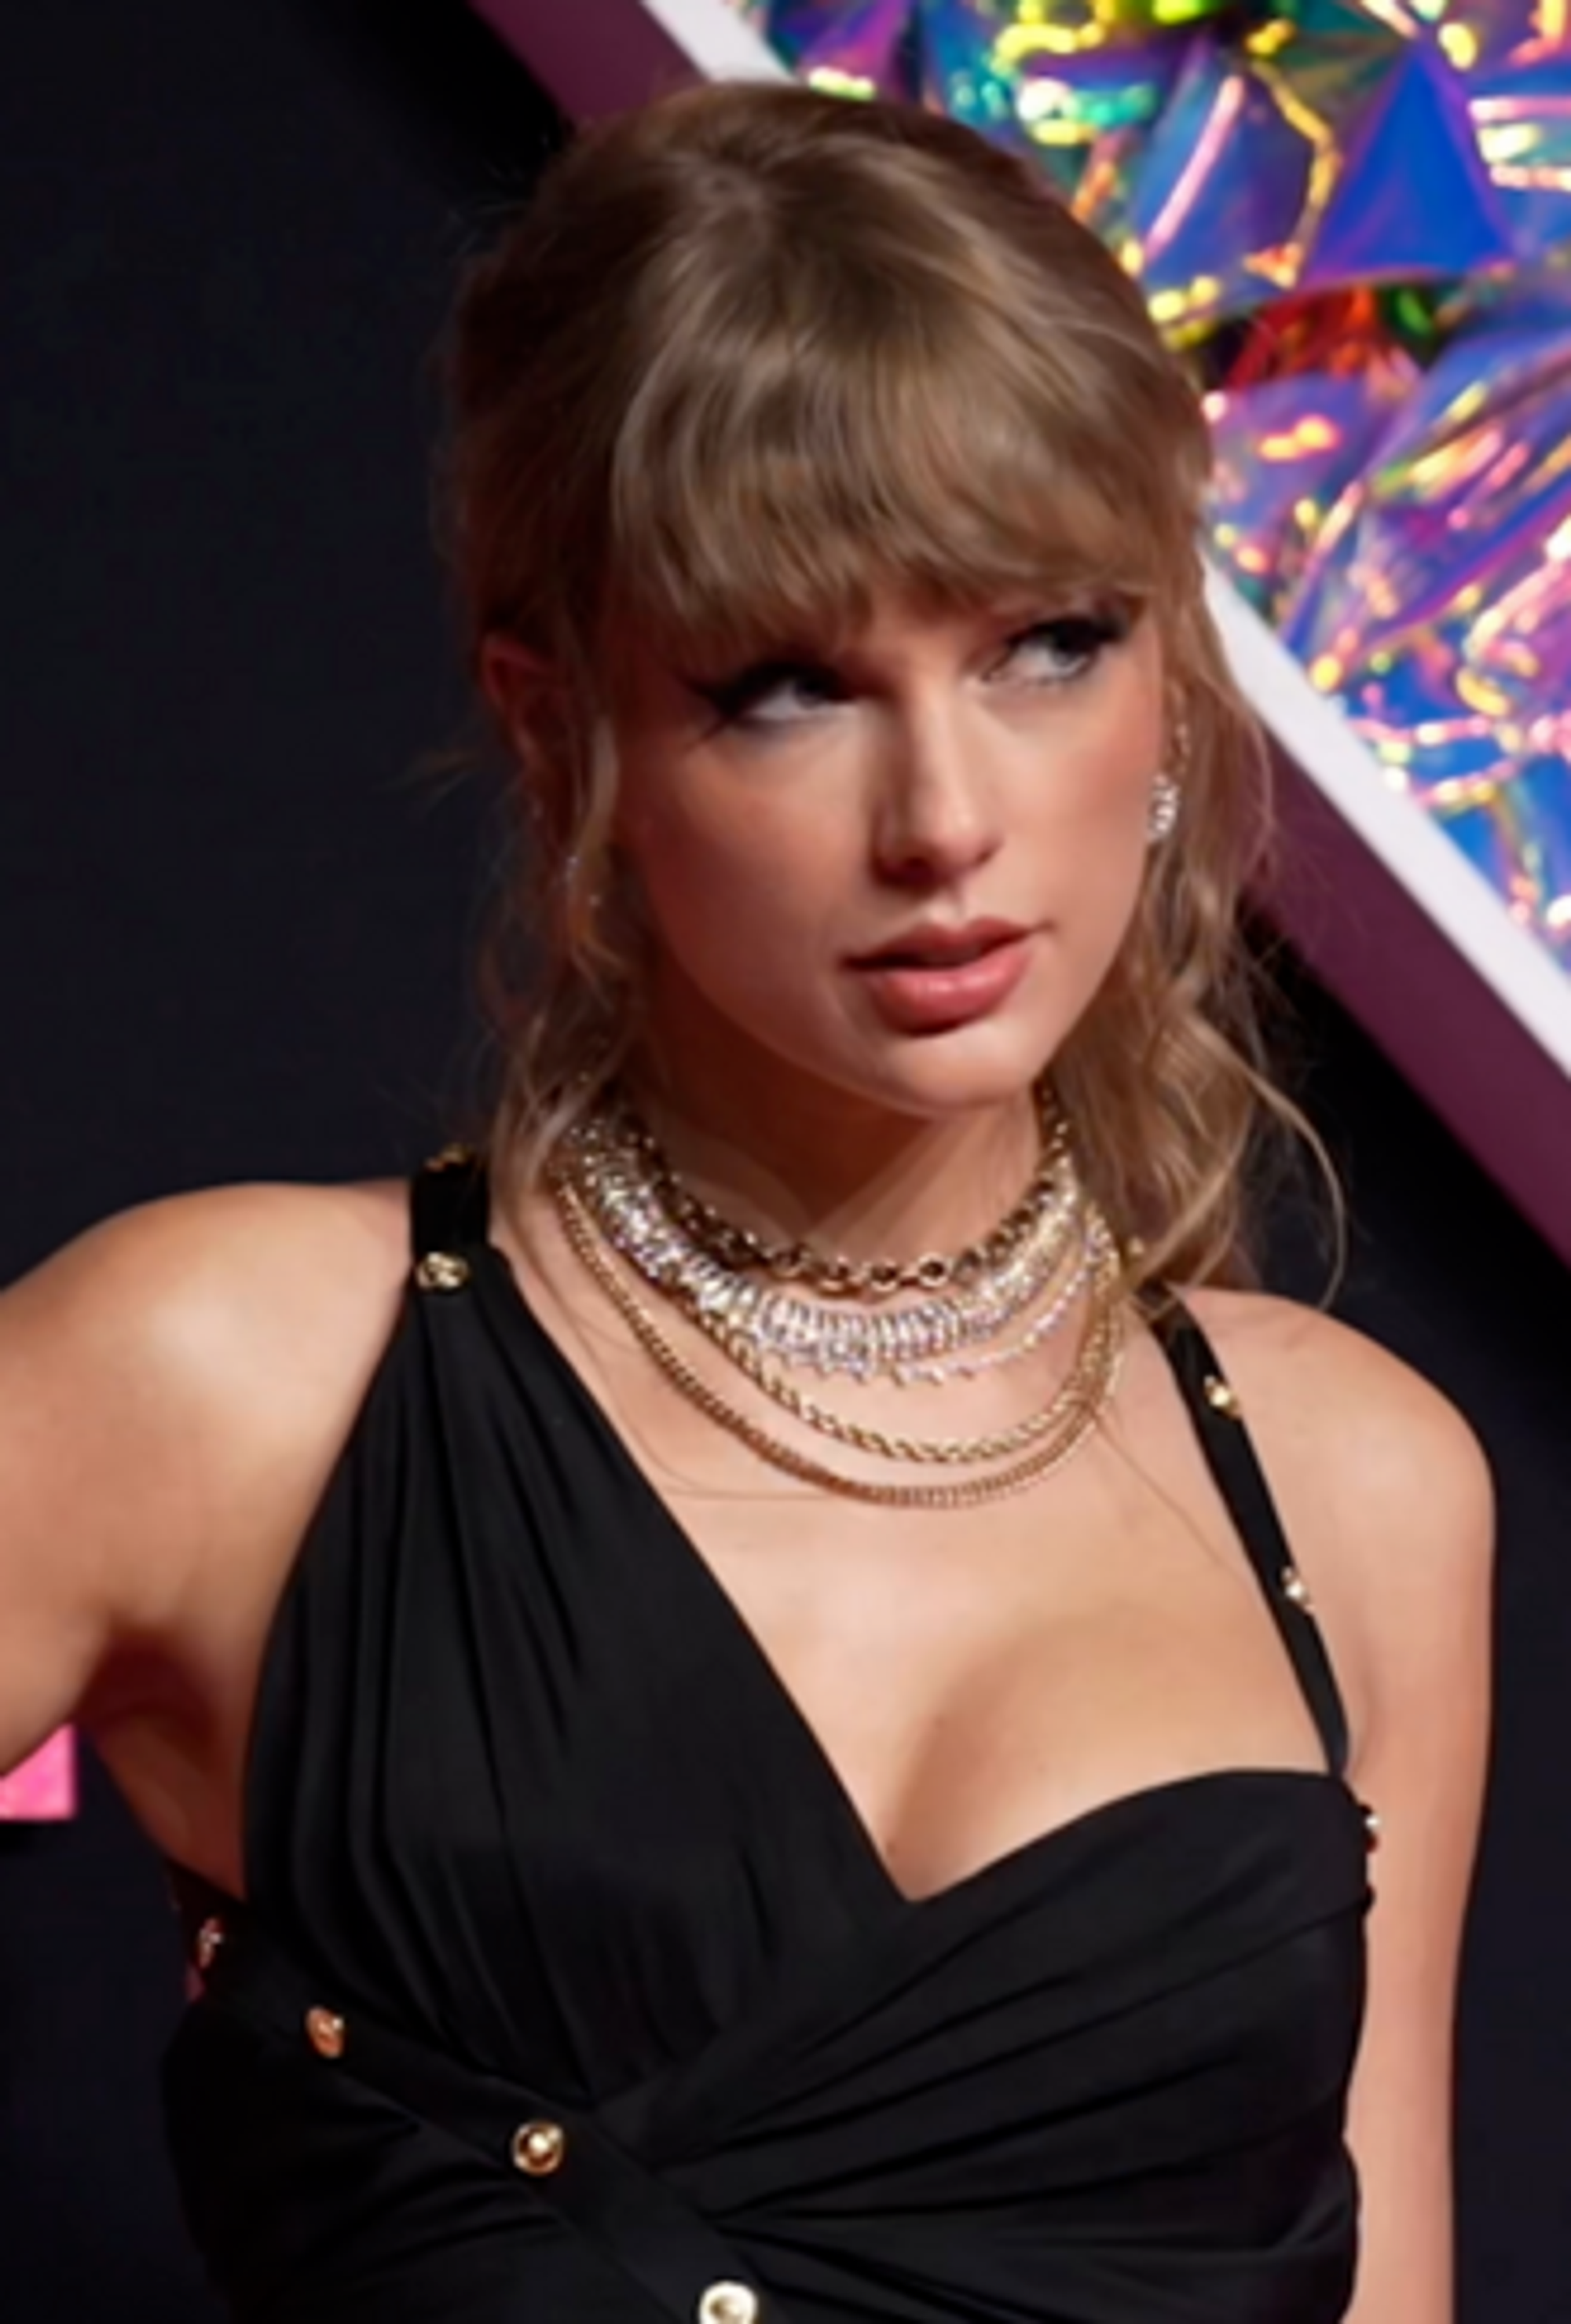 Taylor Swift wearing a black dress with deep V-neckline and gold necklace, posing with a hand on her hip, against a colorful 